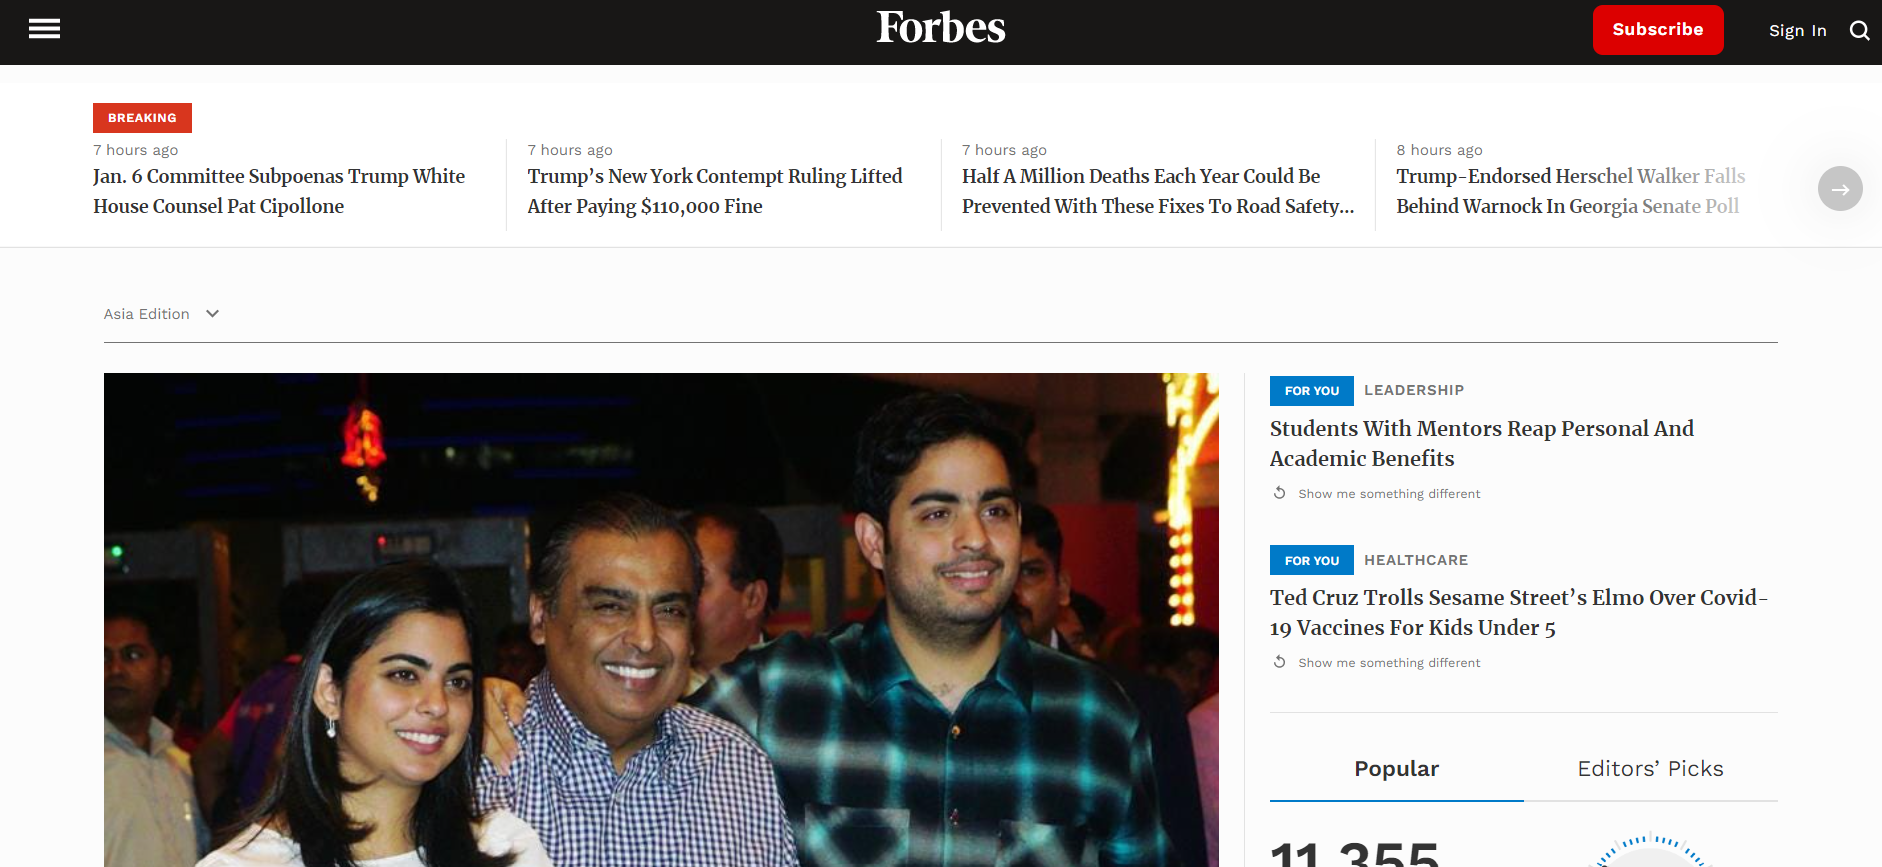 forbes - Unbiased News Sources